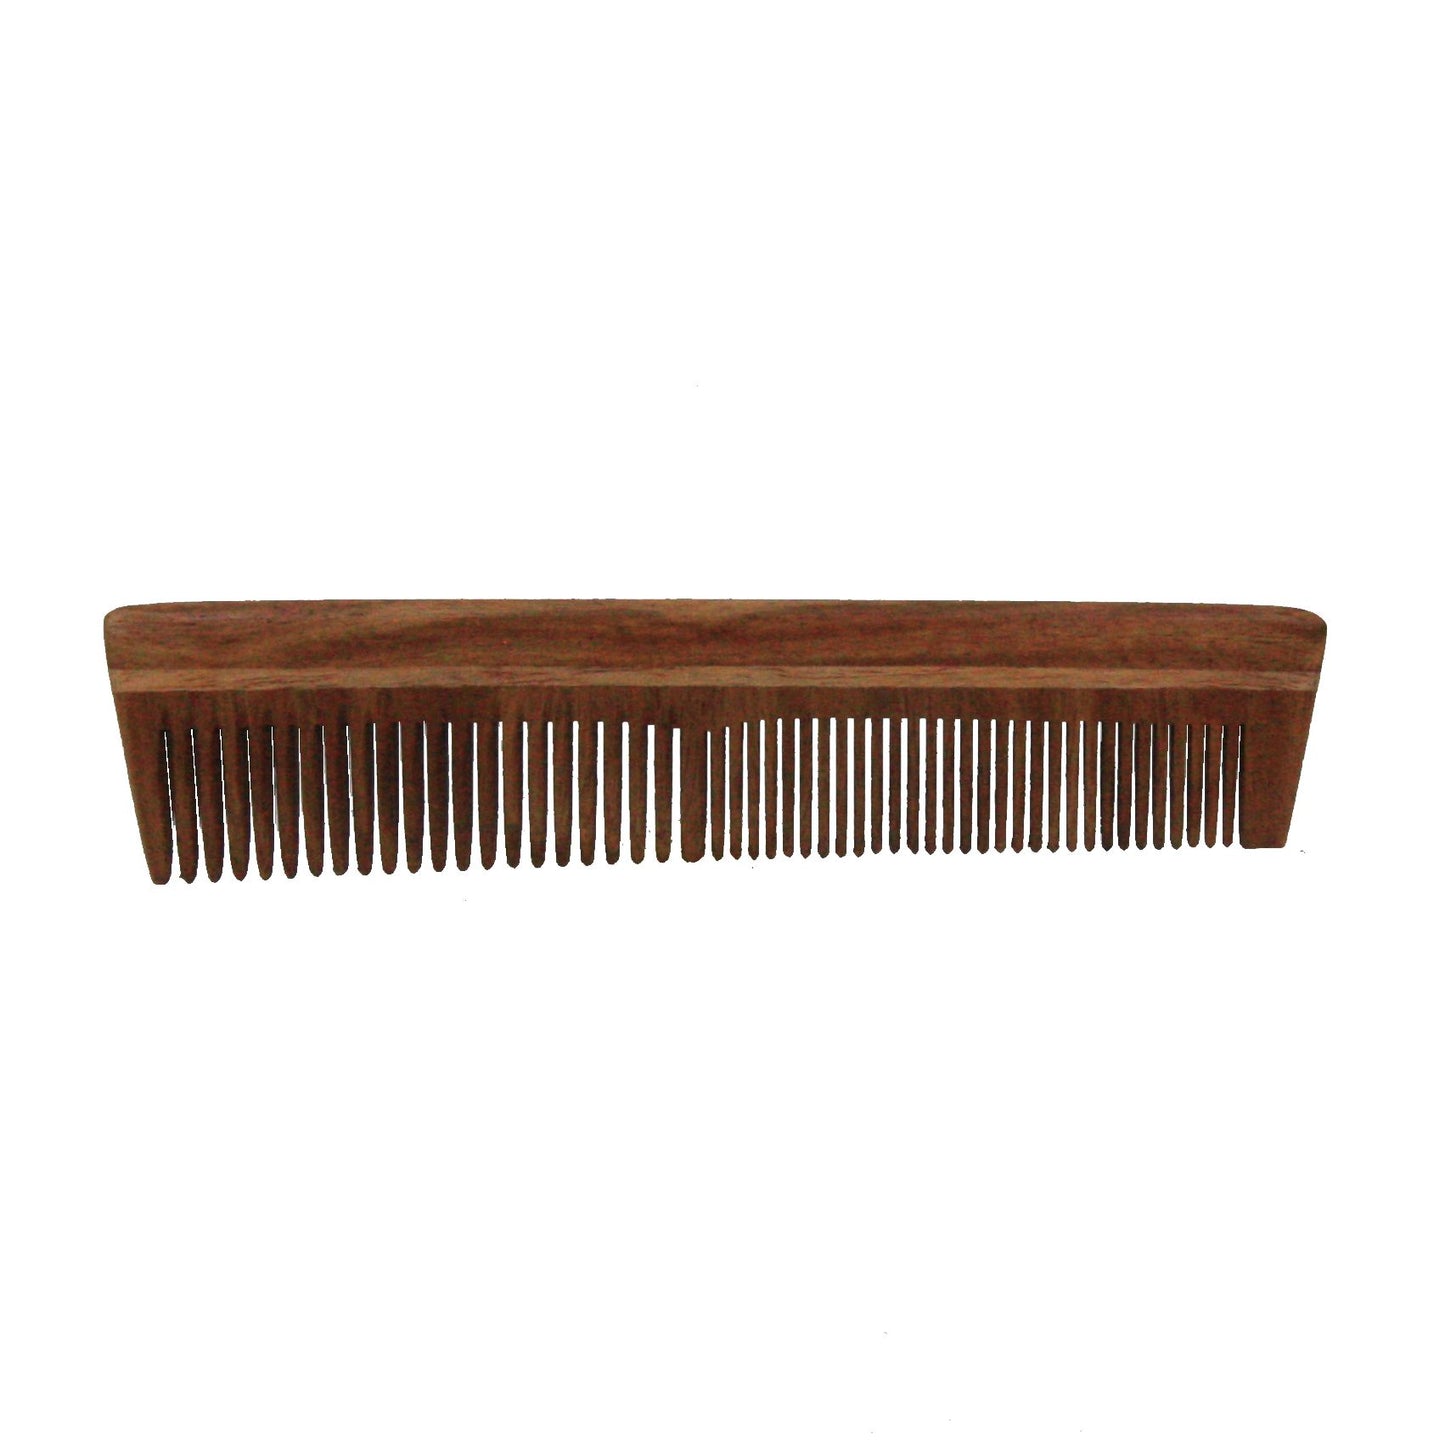 7.5in Wood Styling Comb  - CLOSEOUT, LIMITED STOCK AVAILABLE